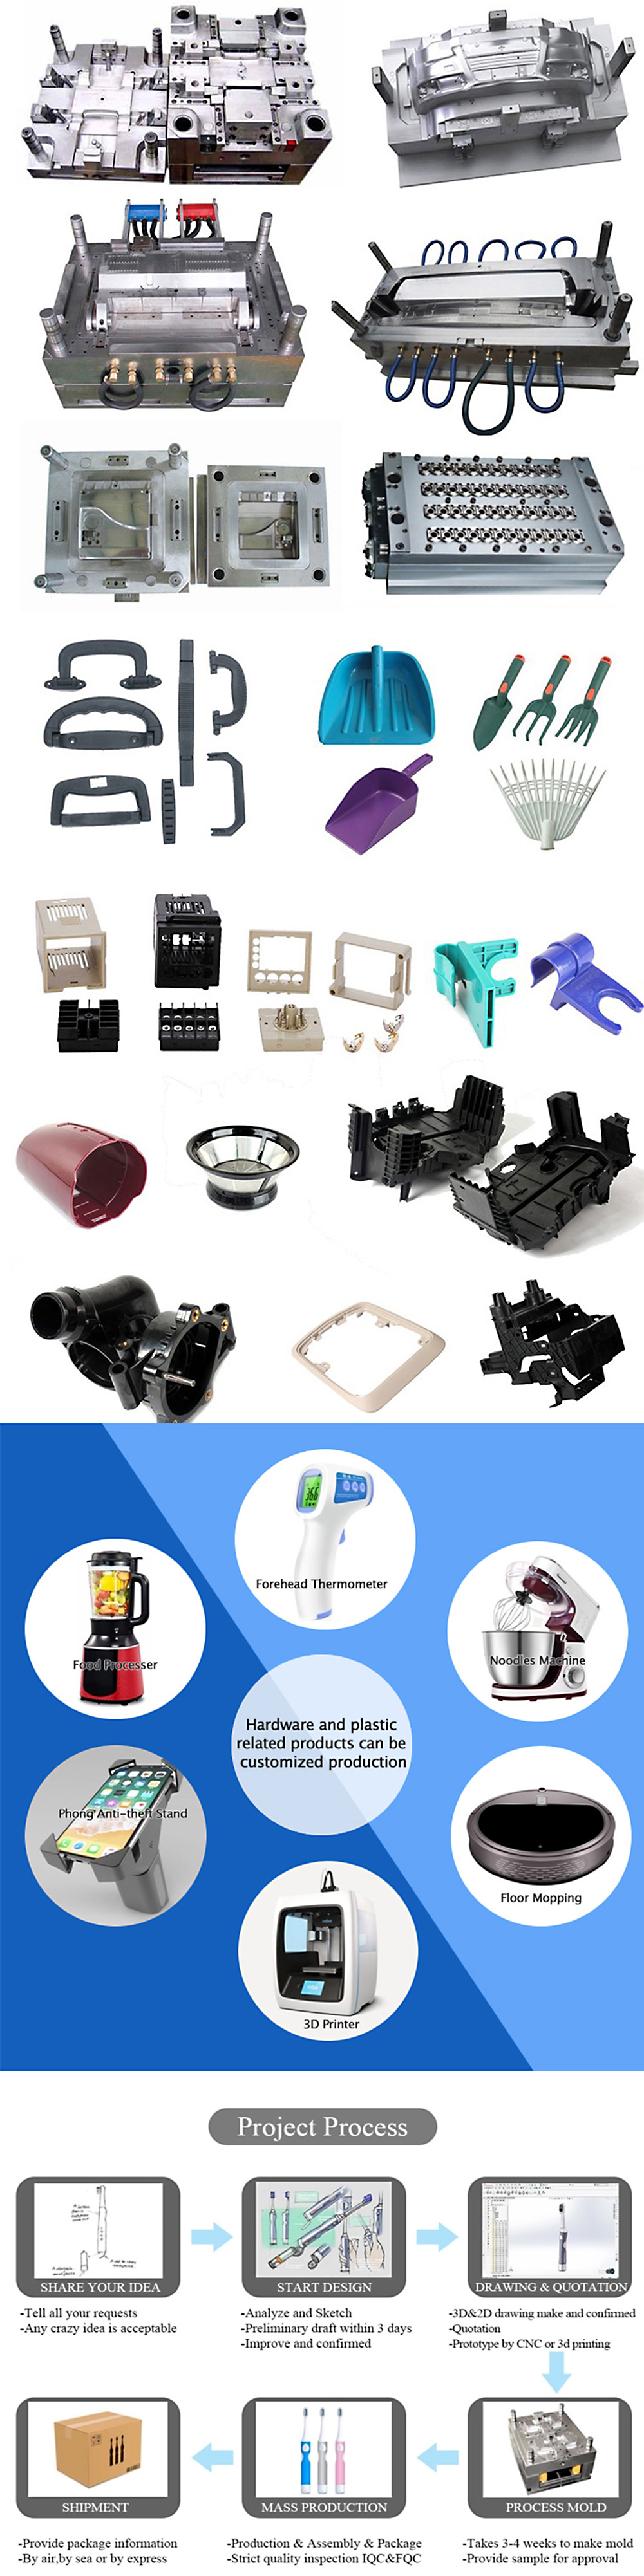 duy-injection-molding-machine-price | tungsten carbide injection-molding-core-pins | molding inject various plastic injection